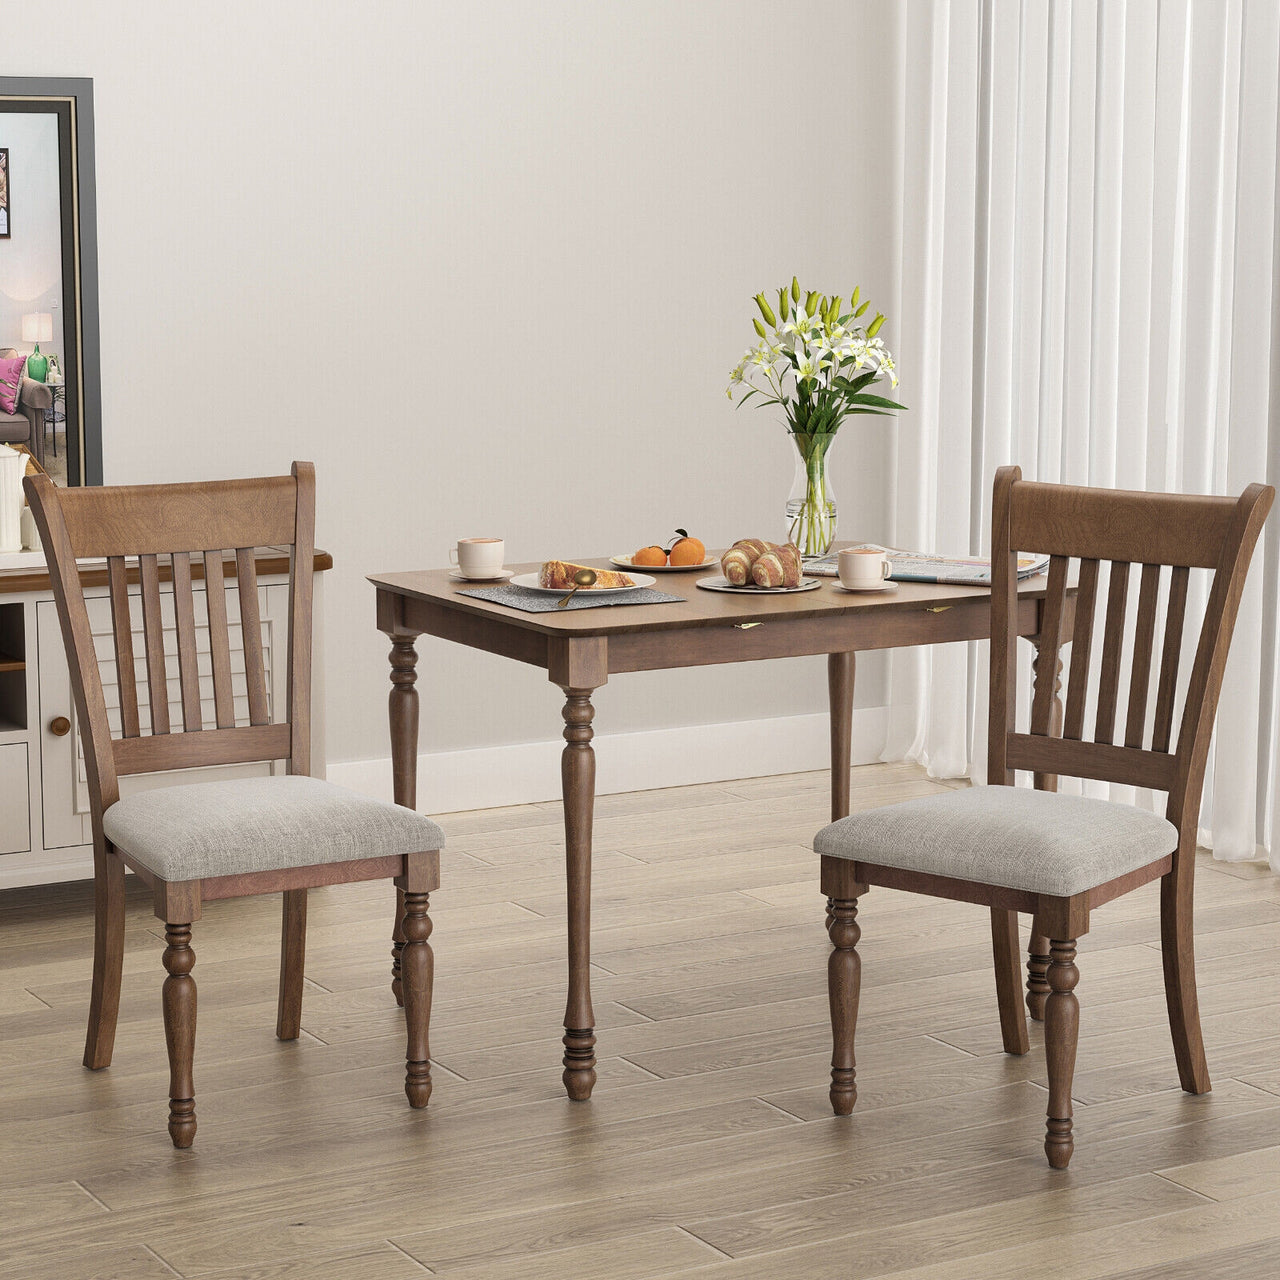 2 Pieces Vintage Wooden Upholstered Dining Chair Set with Padded Cushion - Gallery View 2 of 11